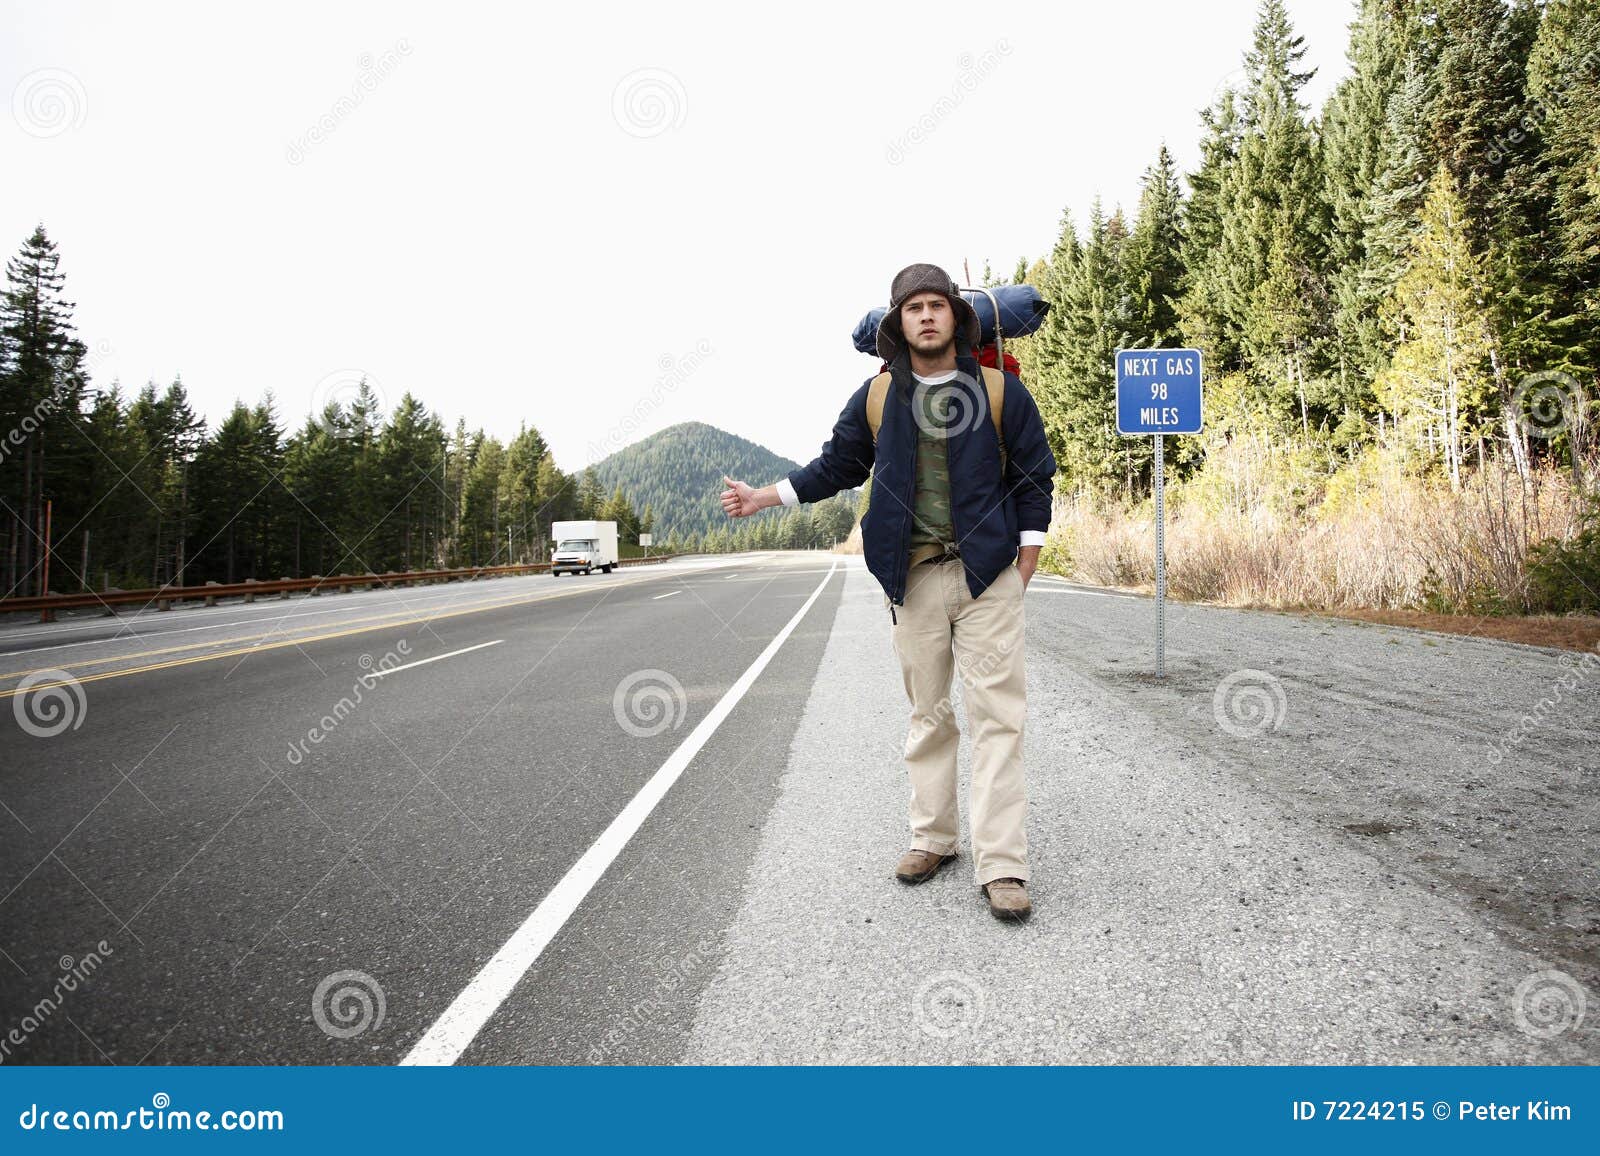 Backpacker Hitchhiking Stock Image Image Of Explore Wilderness 7224215